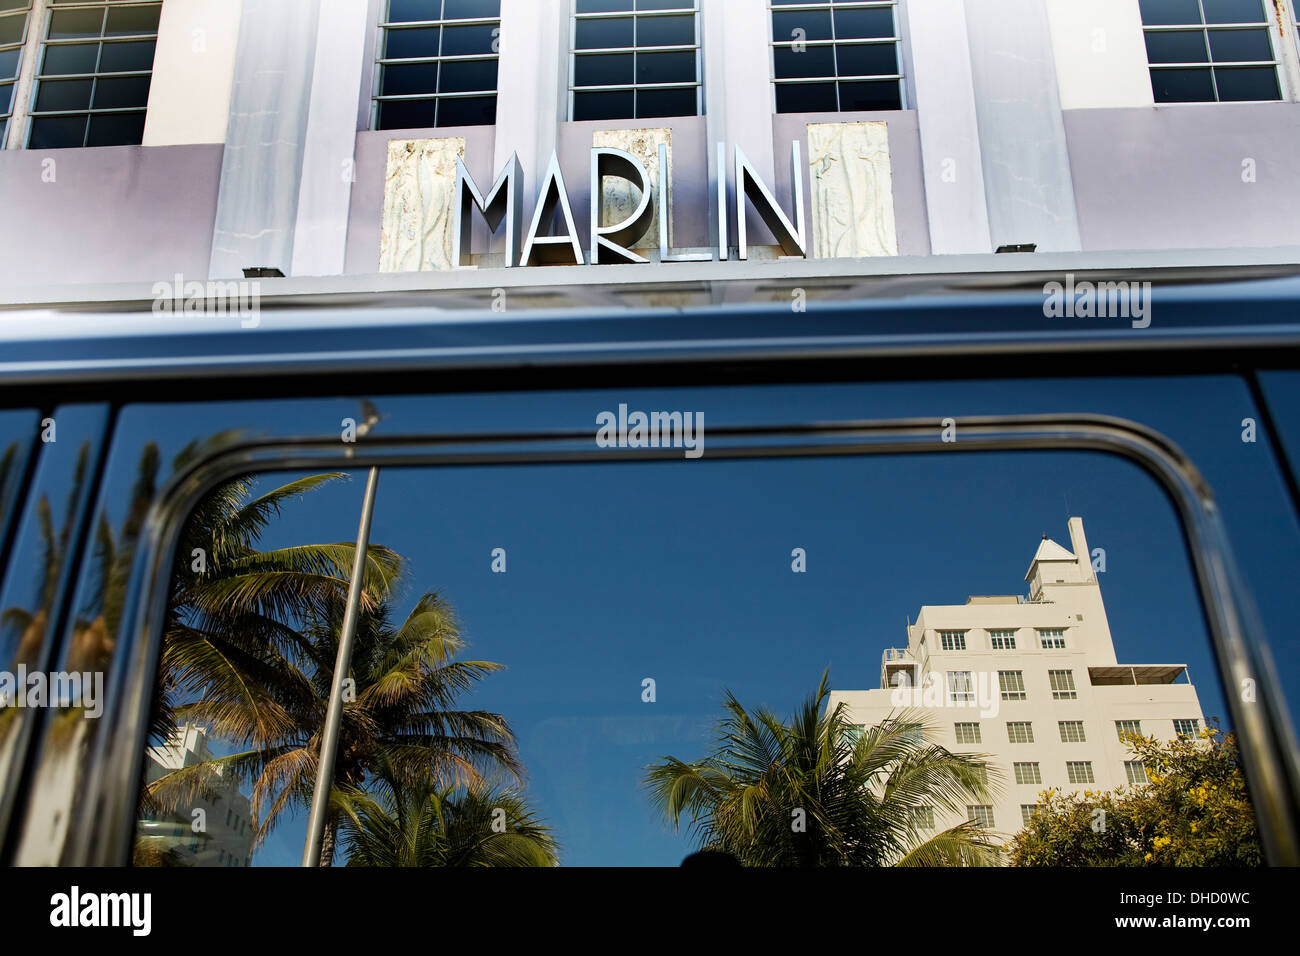 Marlin Hotel With Car Window Reflection; Southbeach, Miami Beach, Florida, United States Of America Stock Photo